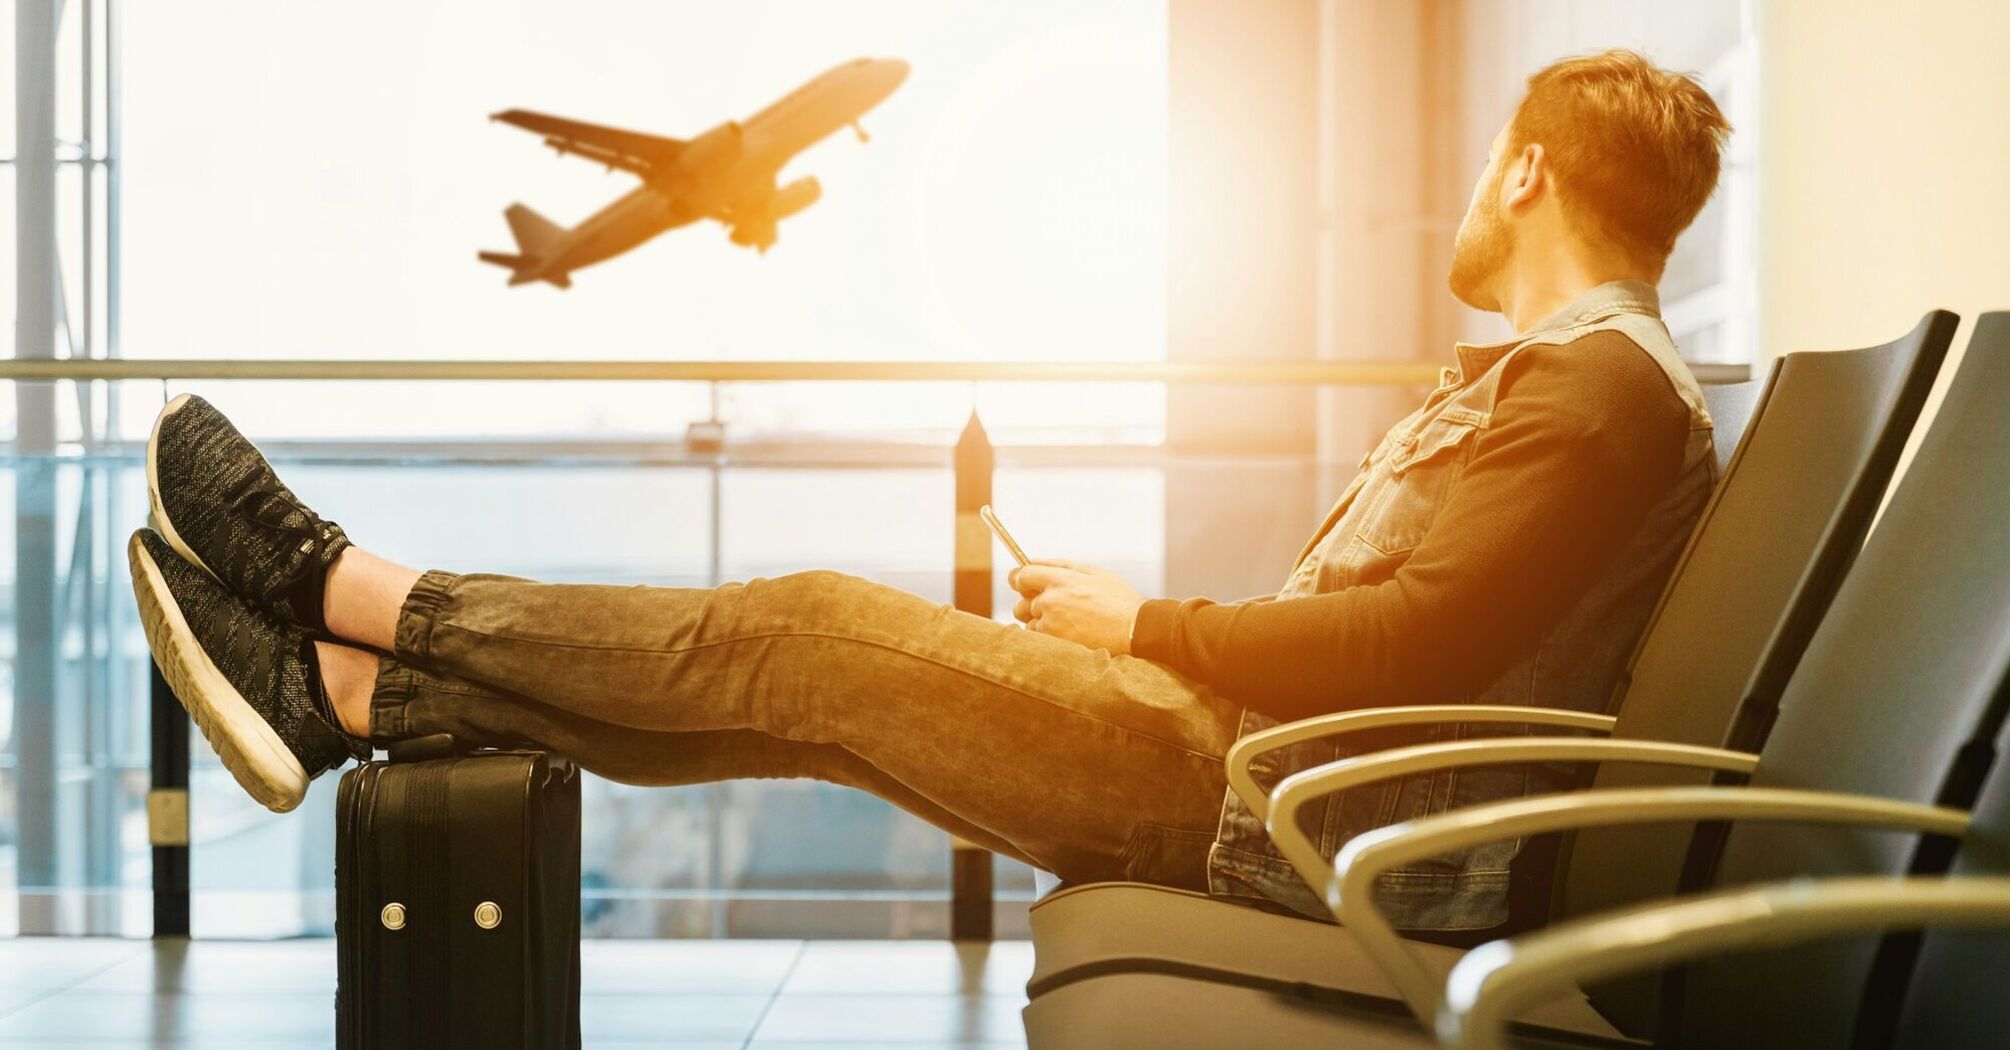 Man sitting in an airport lounge watching a plane take off